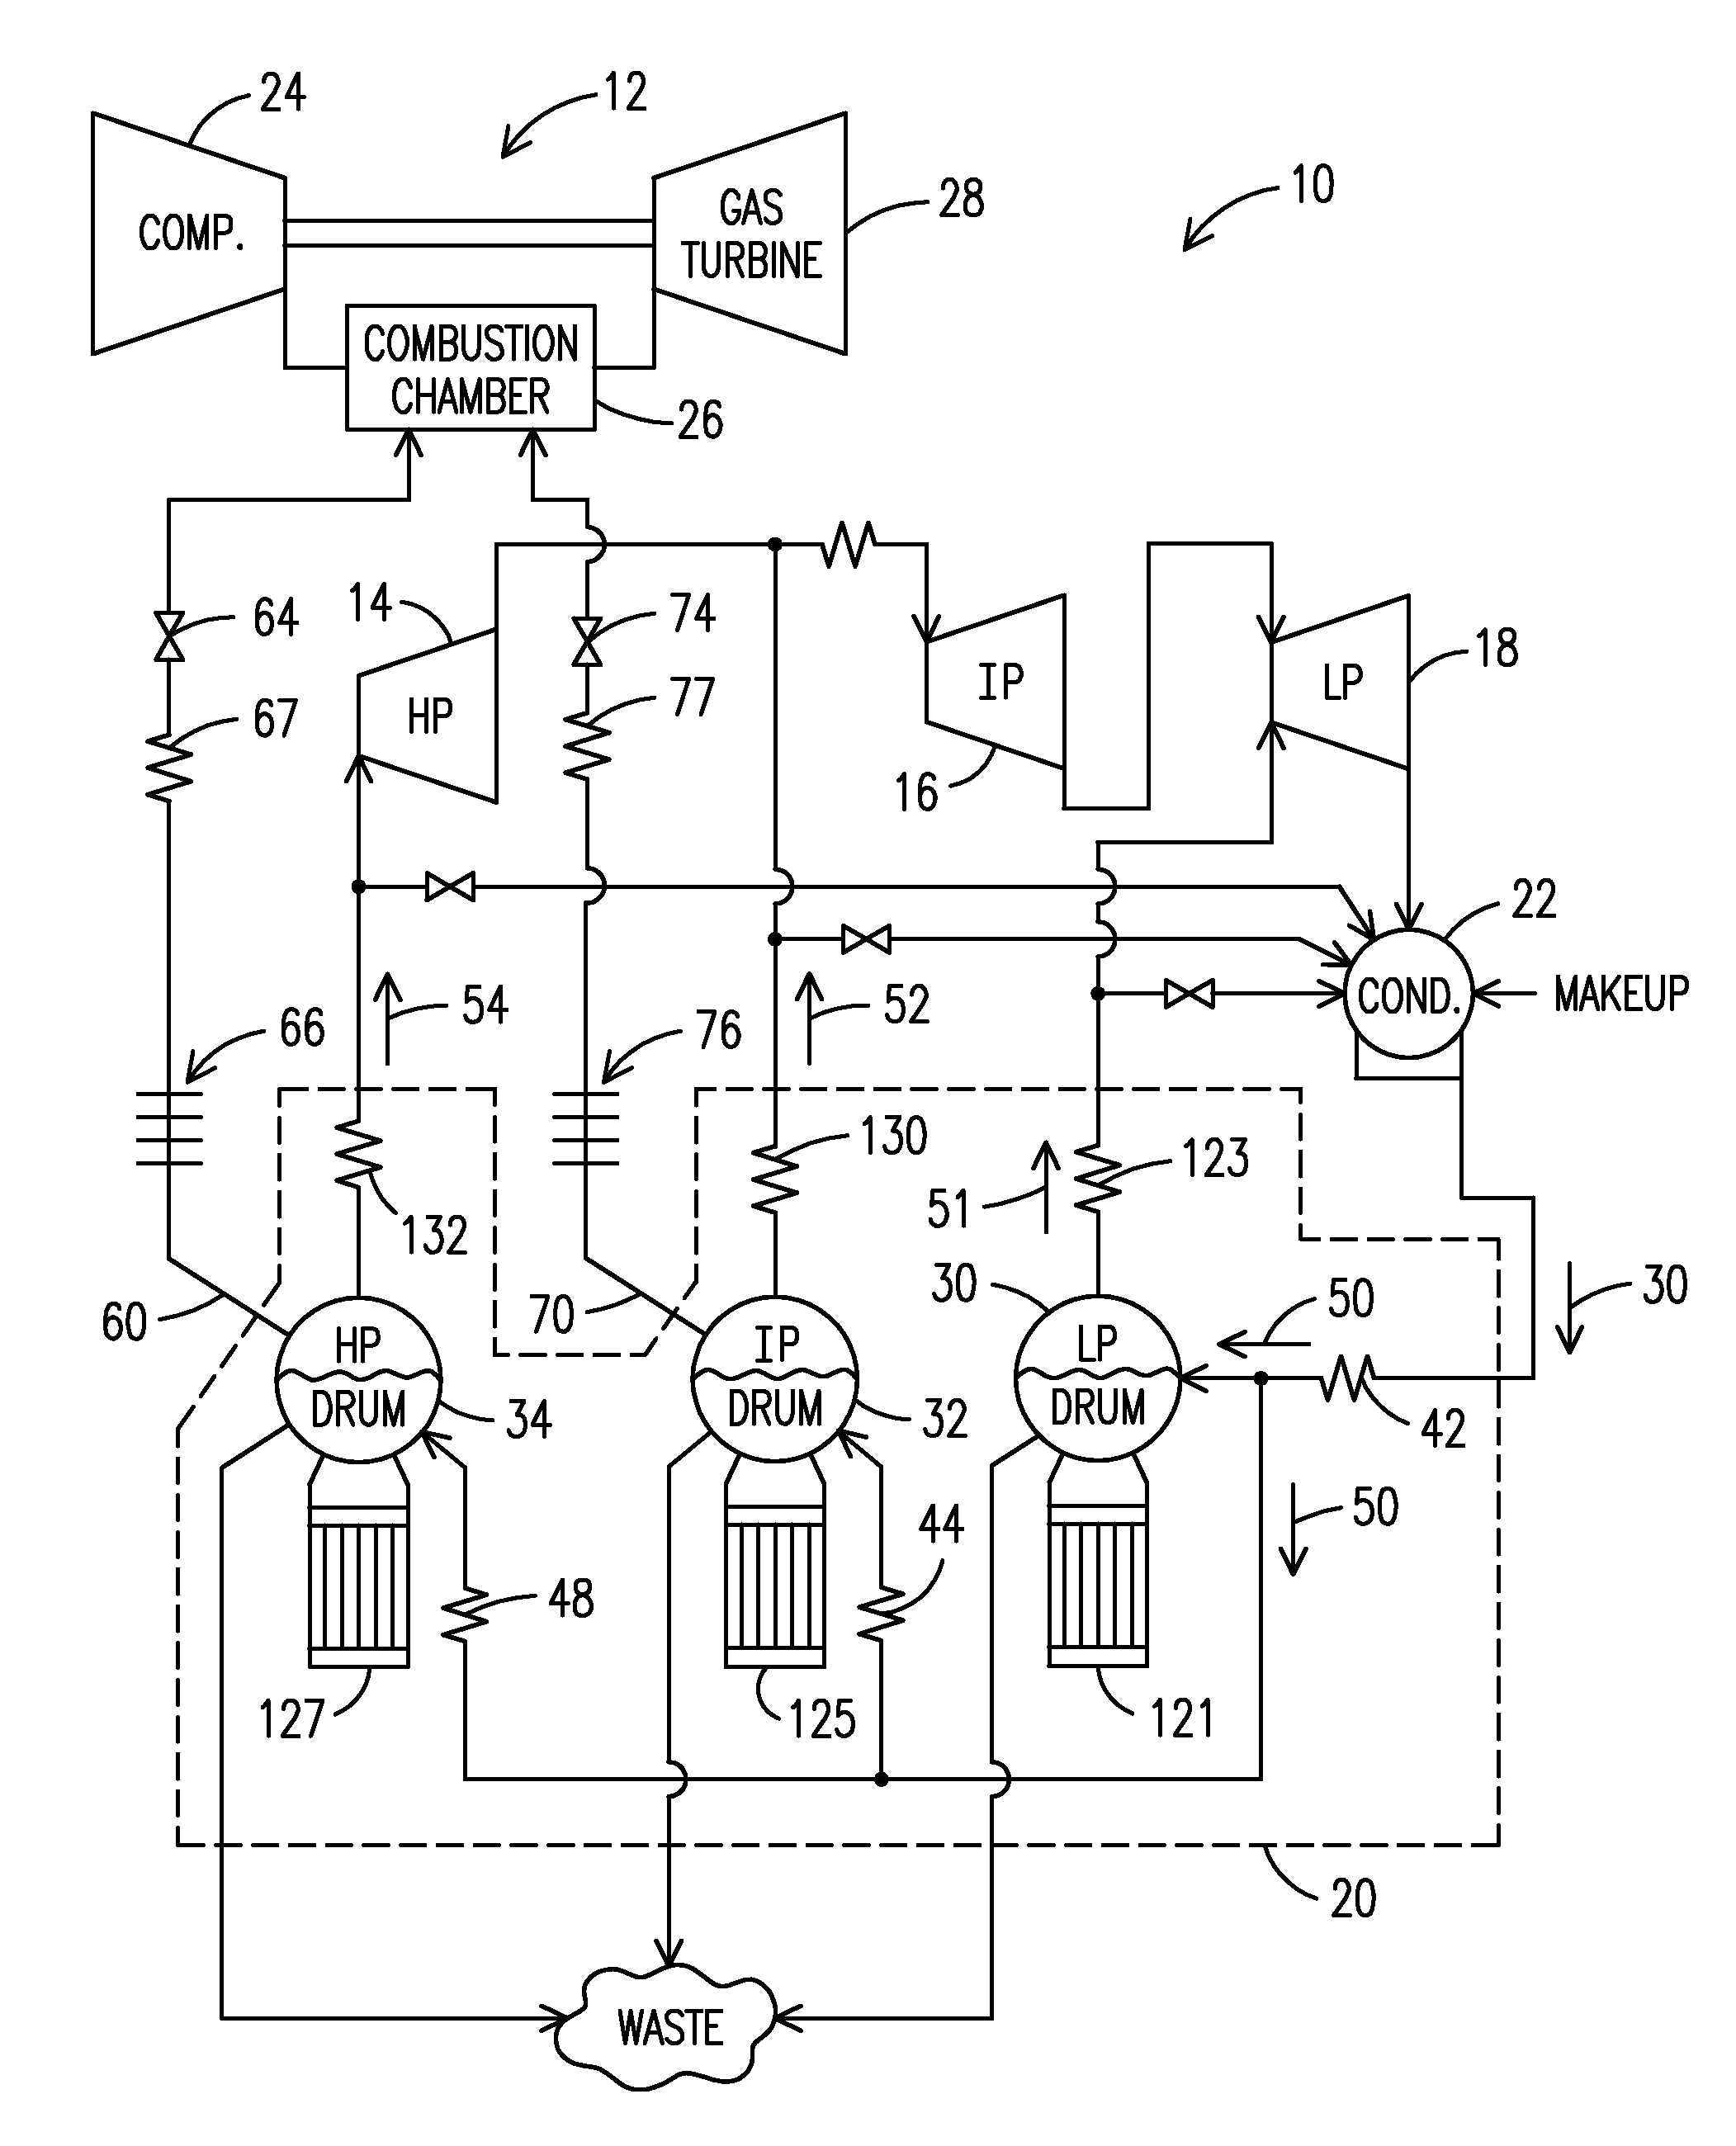 Method for Removal of Entrained Gas in a Combined Cycle Power Generation System